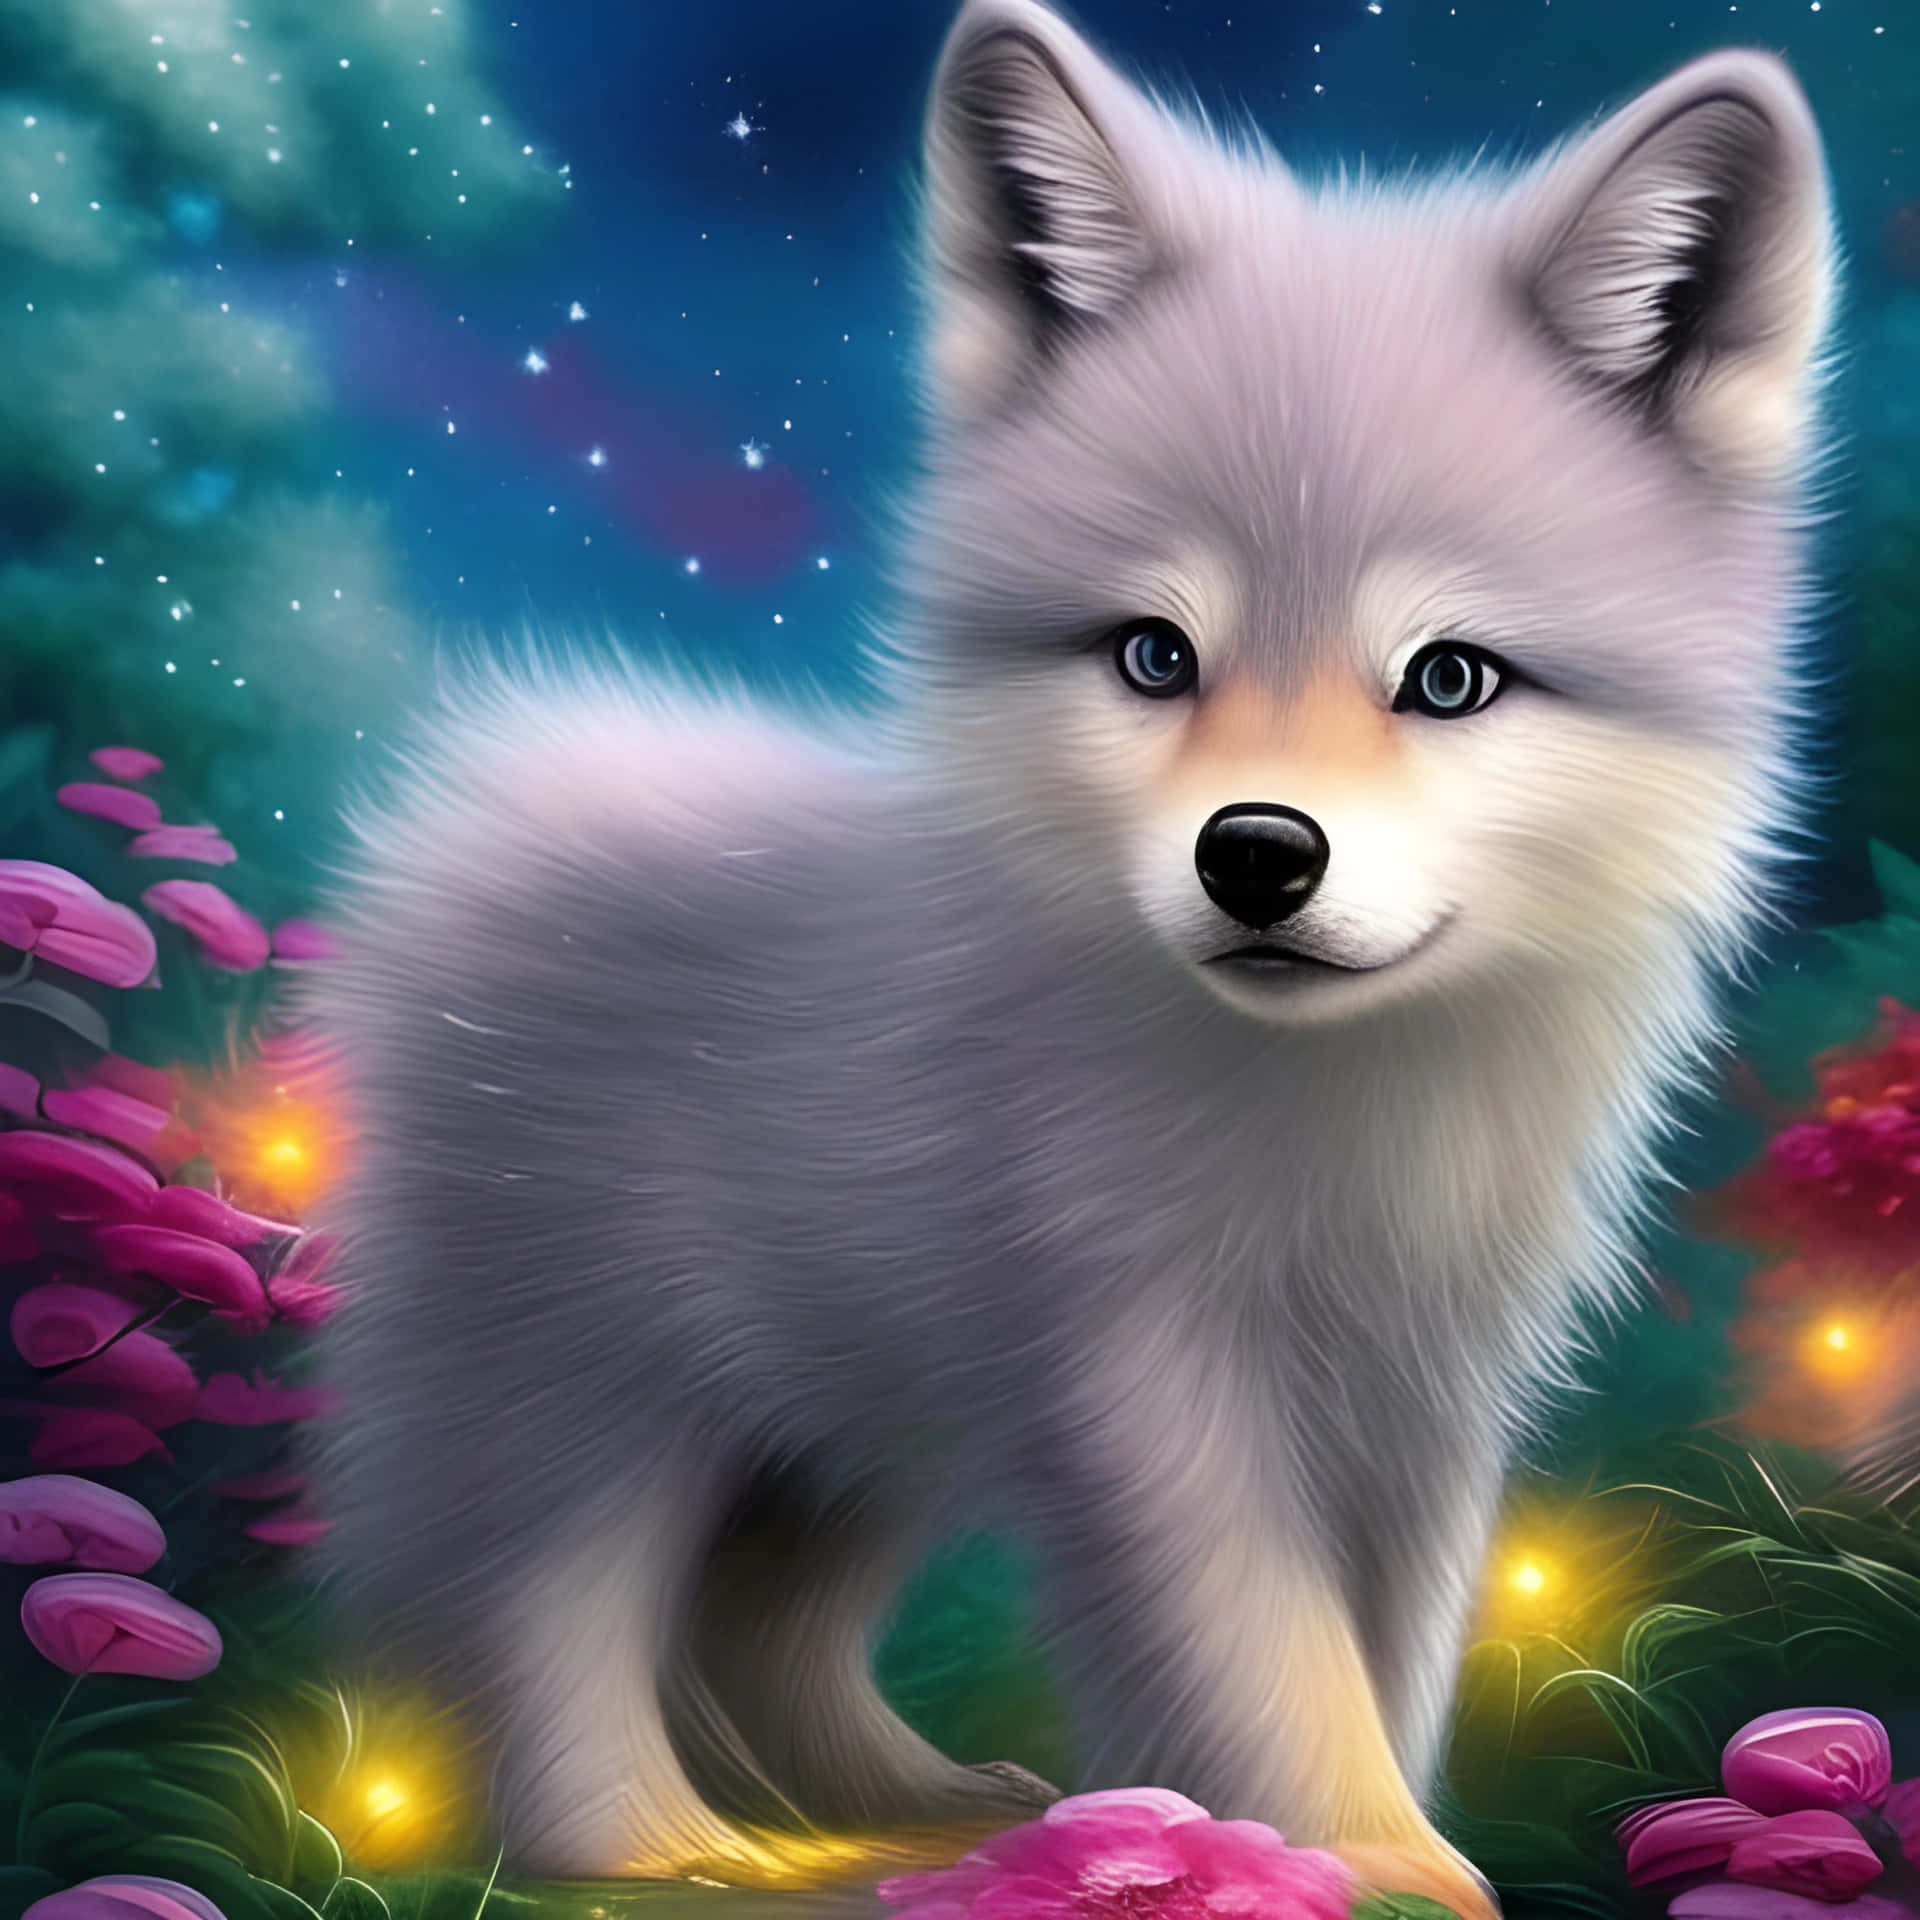 A Cute Fox In The Forest With Flowers